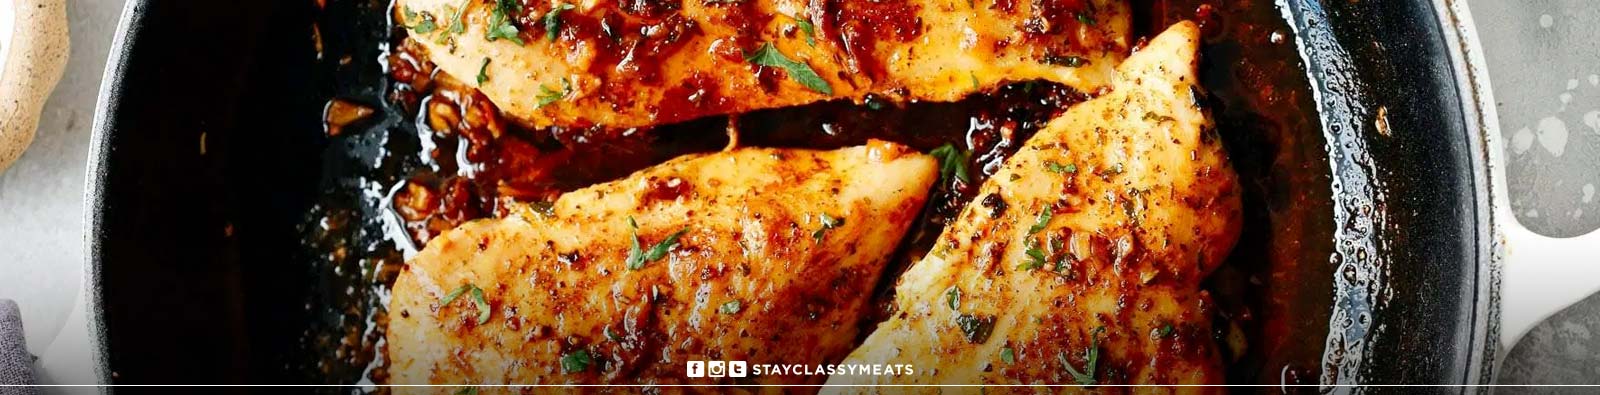 Video - Pan Seared Chicken Breasts with BBQ Sauce